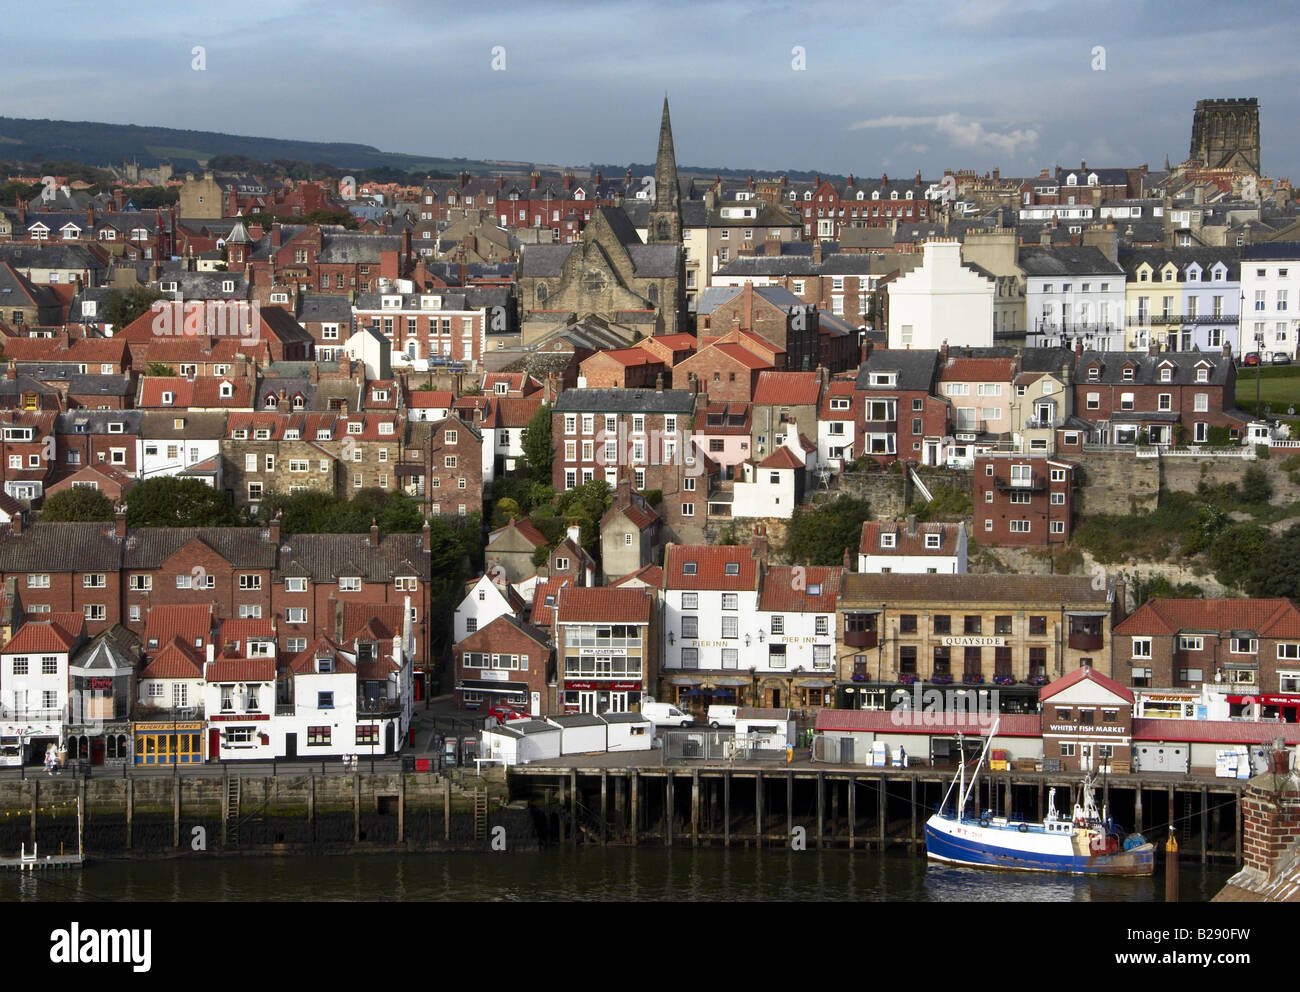 Whitby North Yorkshire UK Date 22 04 2008 Ref ZB764 112612 0013 COMPULSORY CREDIT World Pictures Photoshot Stock Photo